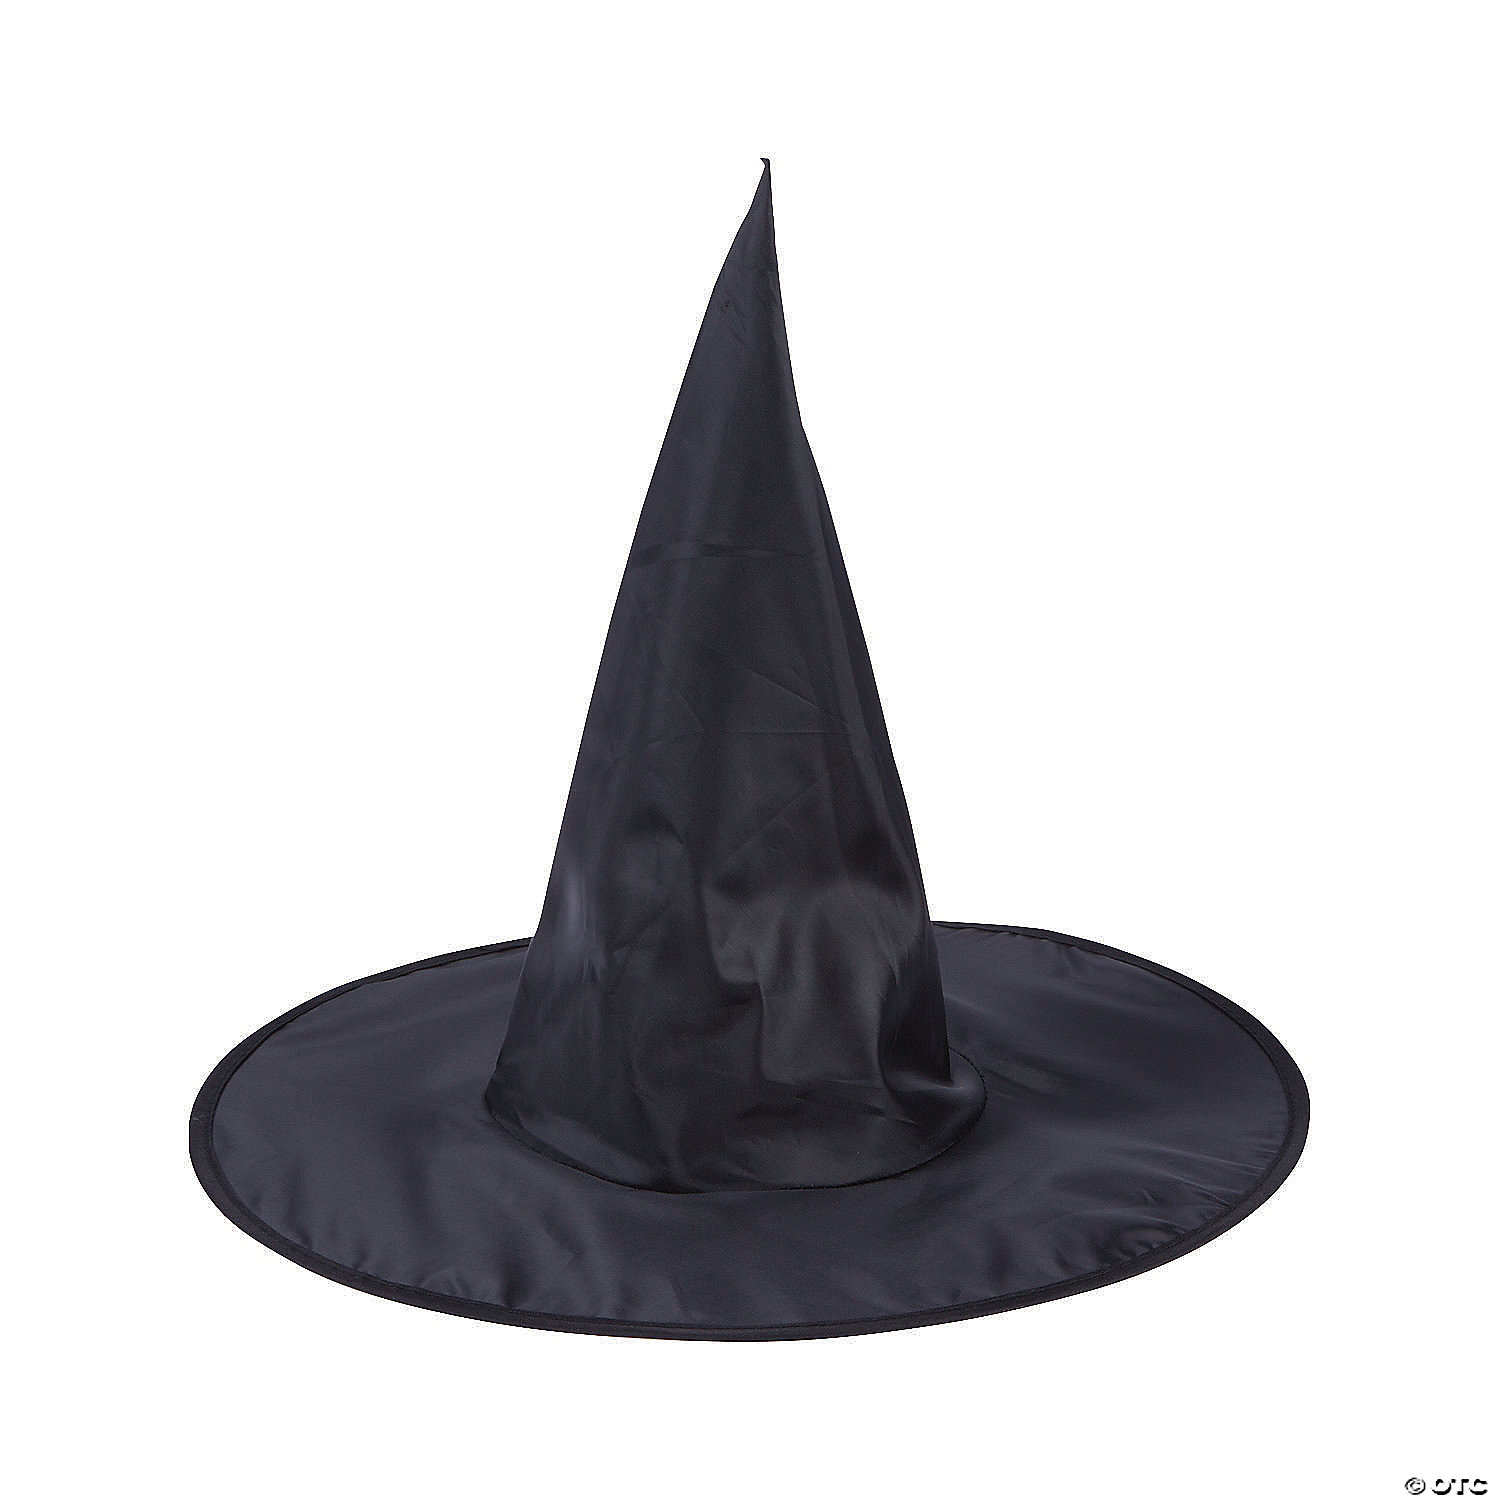 LARGE BLACK WITCH HAT WITH BUCKLE ADULT FANCY DRESS HALLOWEEN COSTUME ACCESSORY